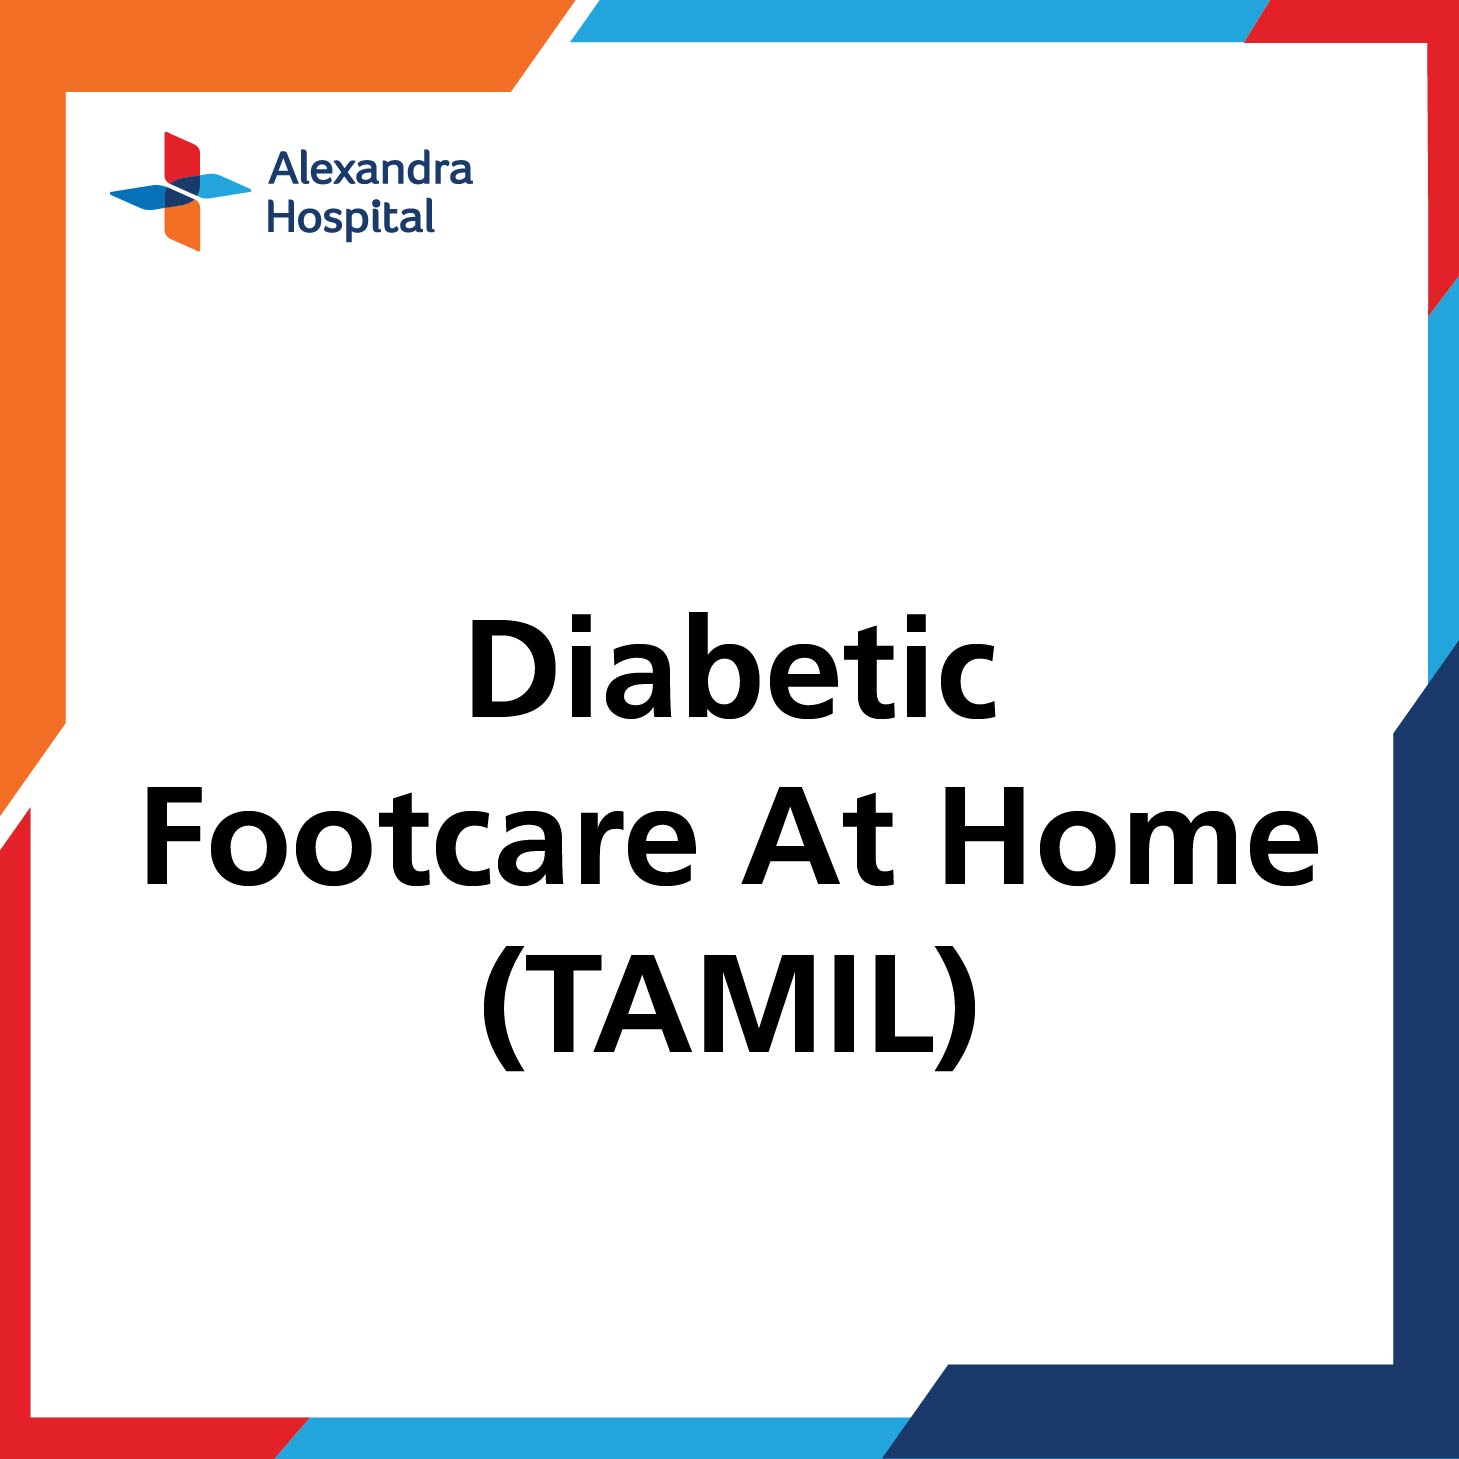 POD - Diabetic Footcare at Home (Tamil)